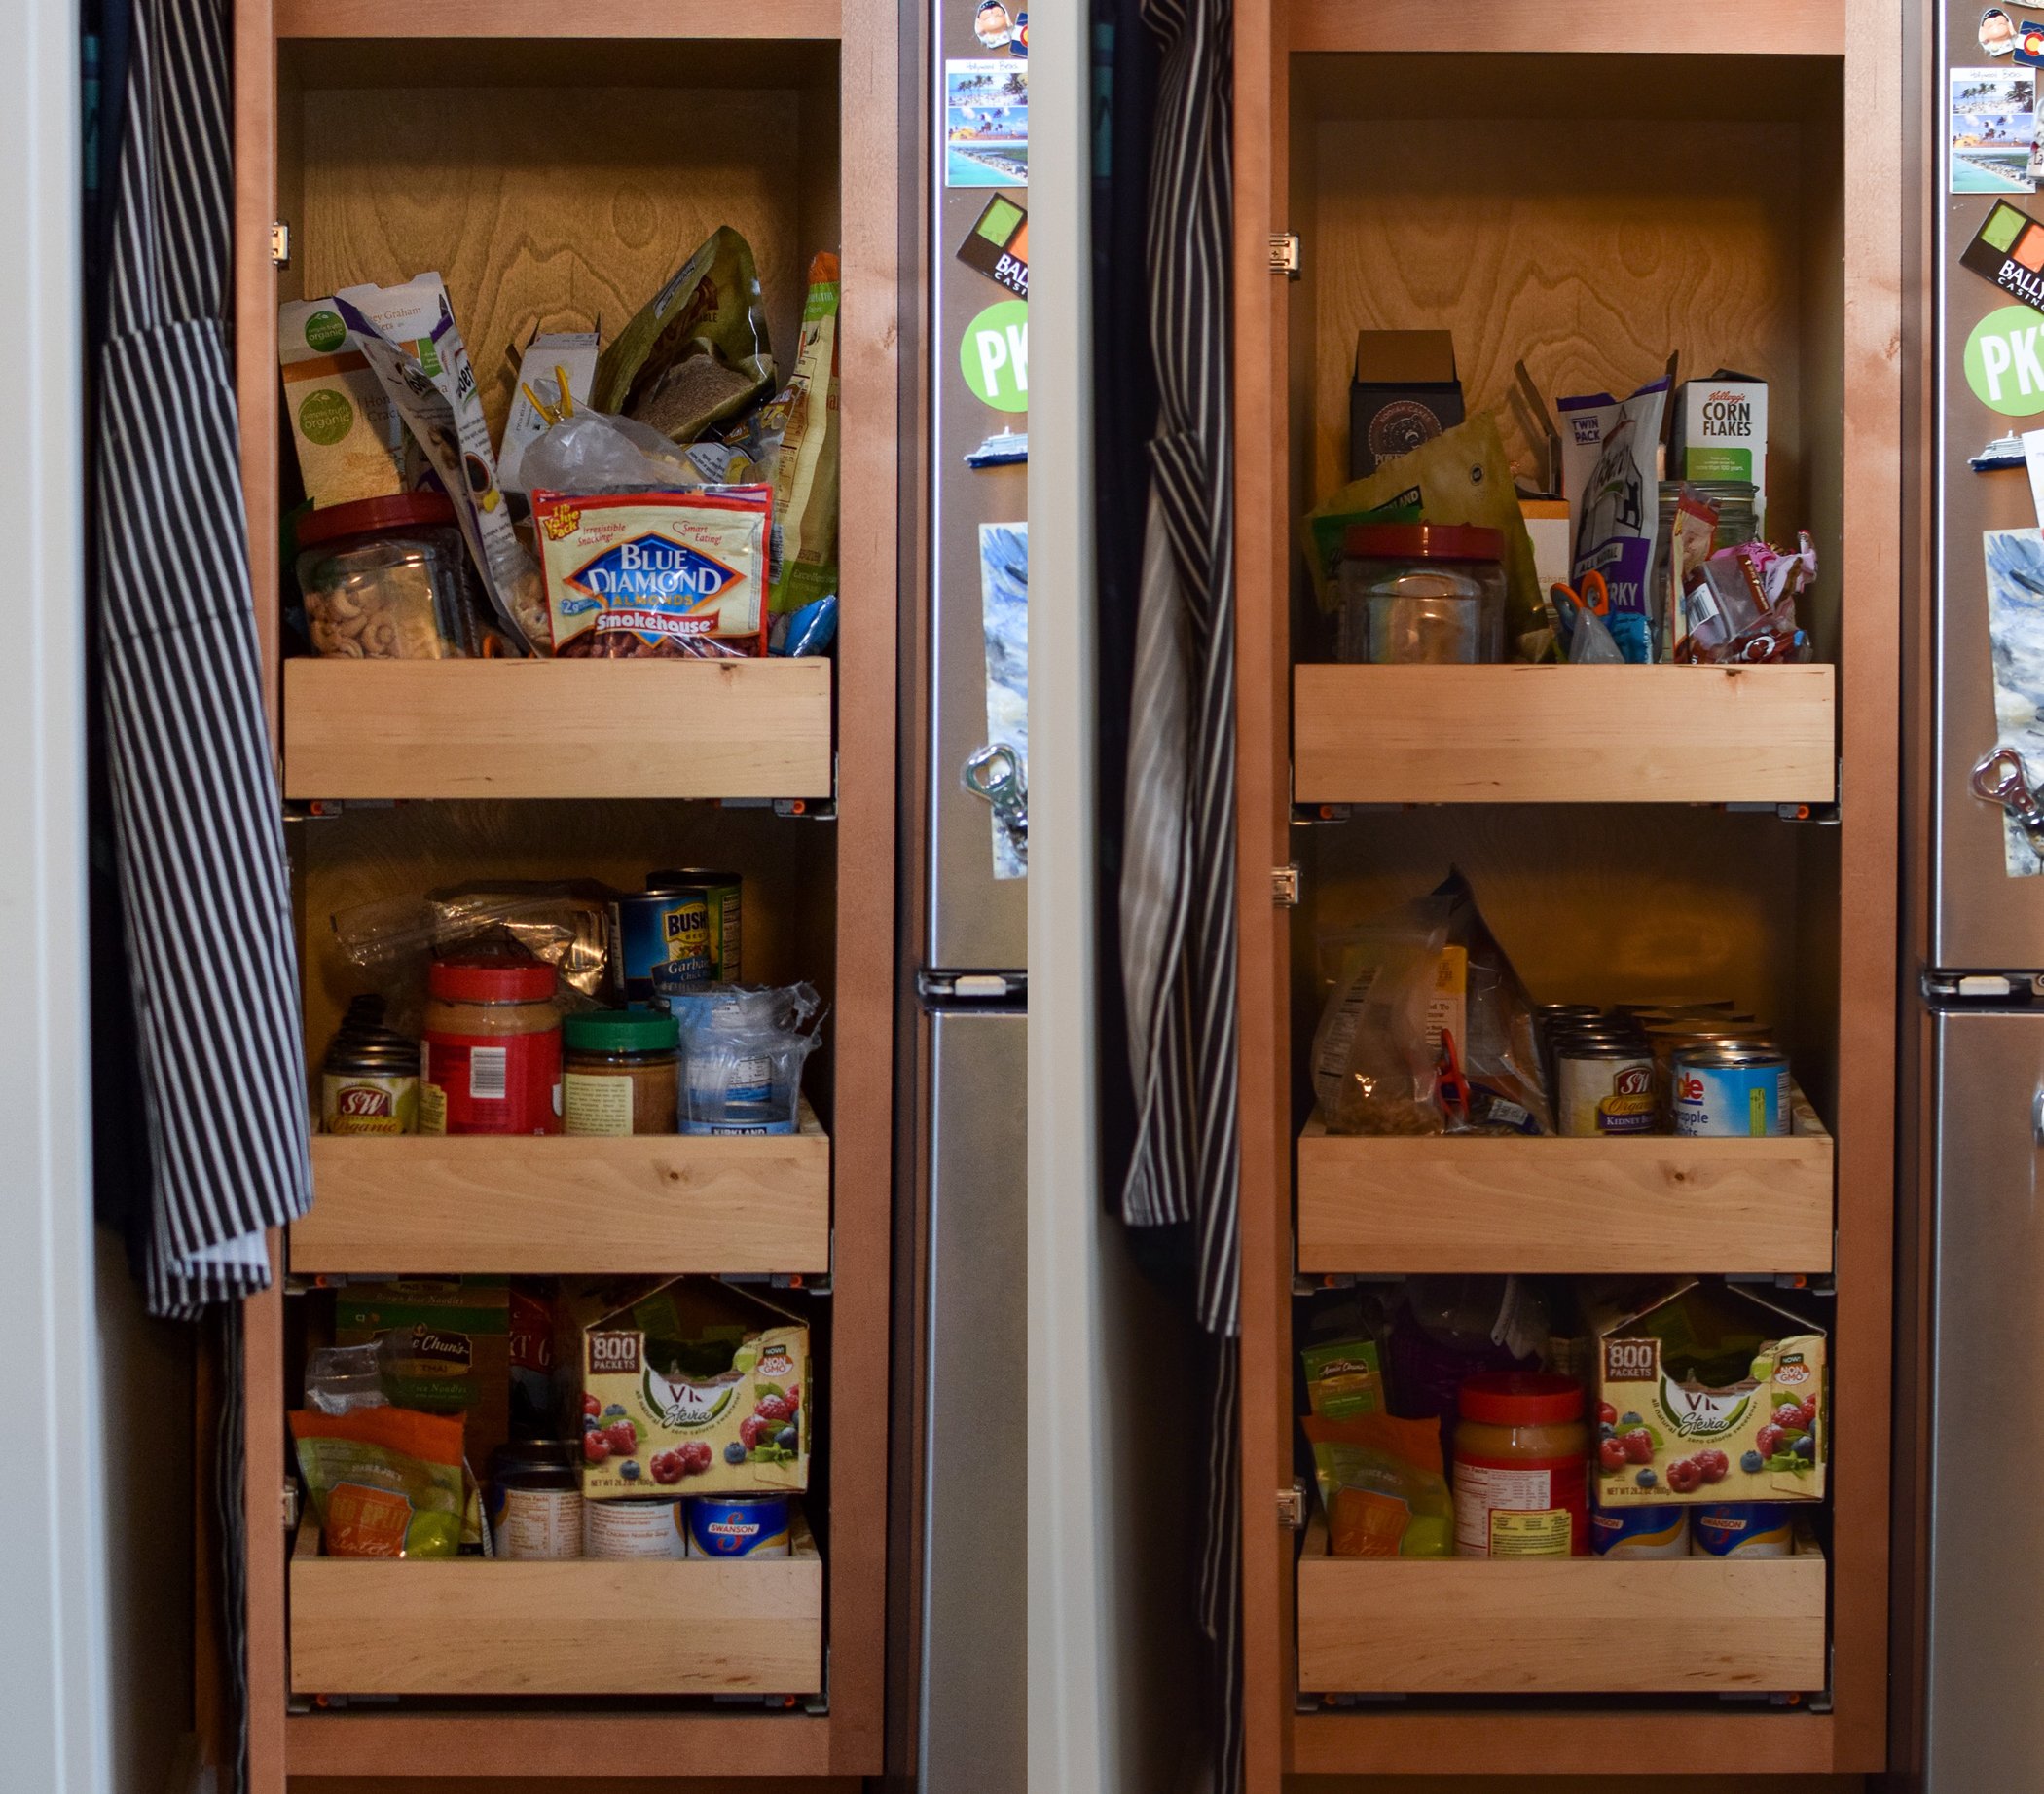 pantry before and after